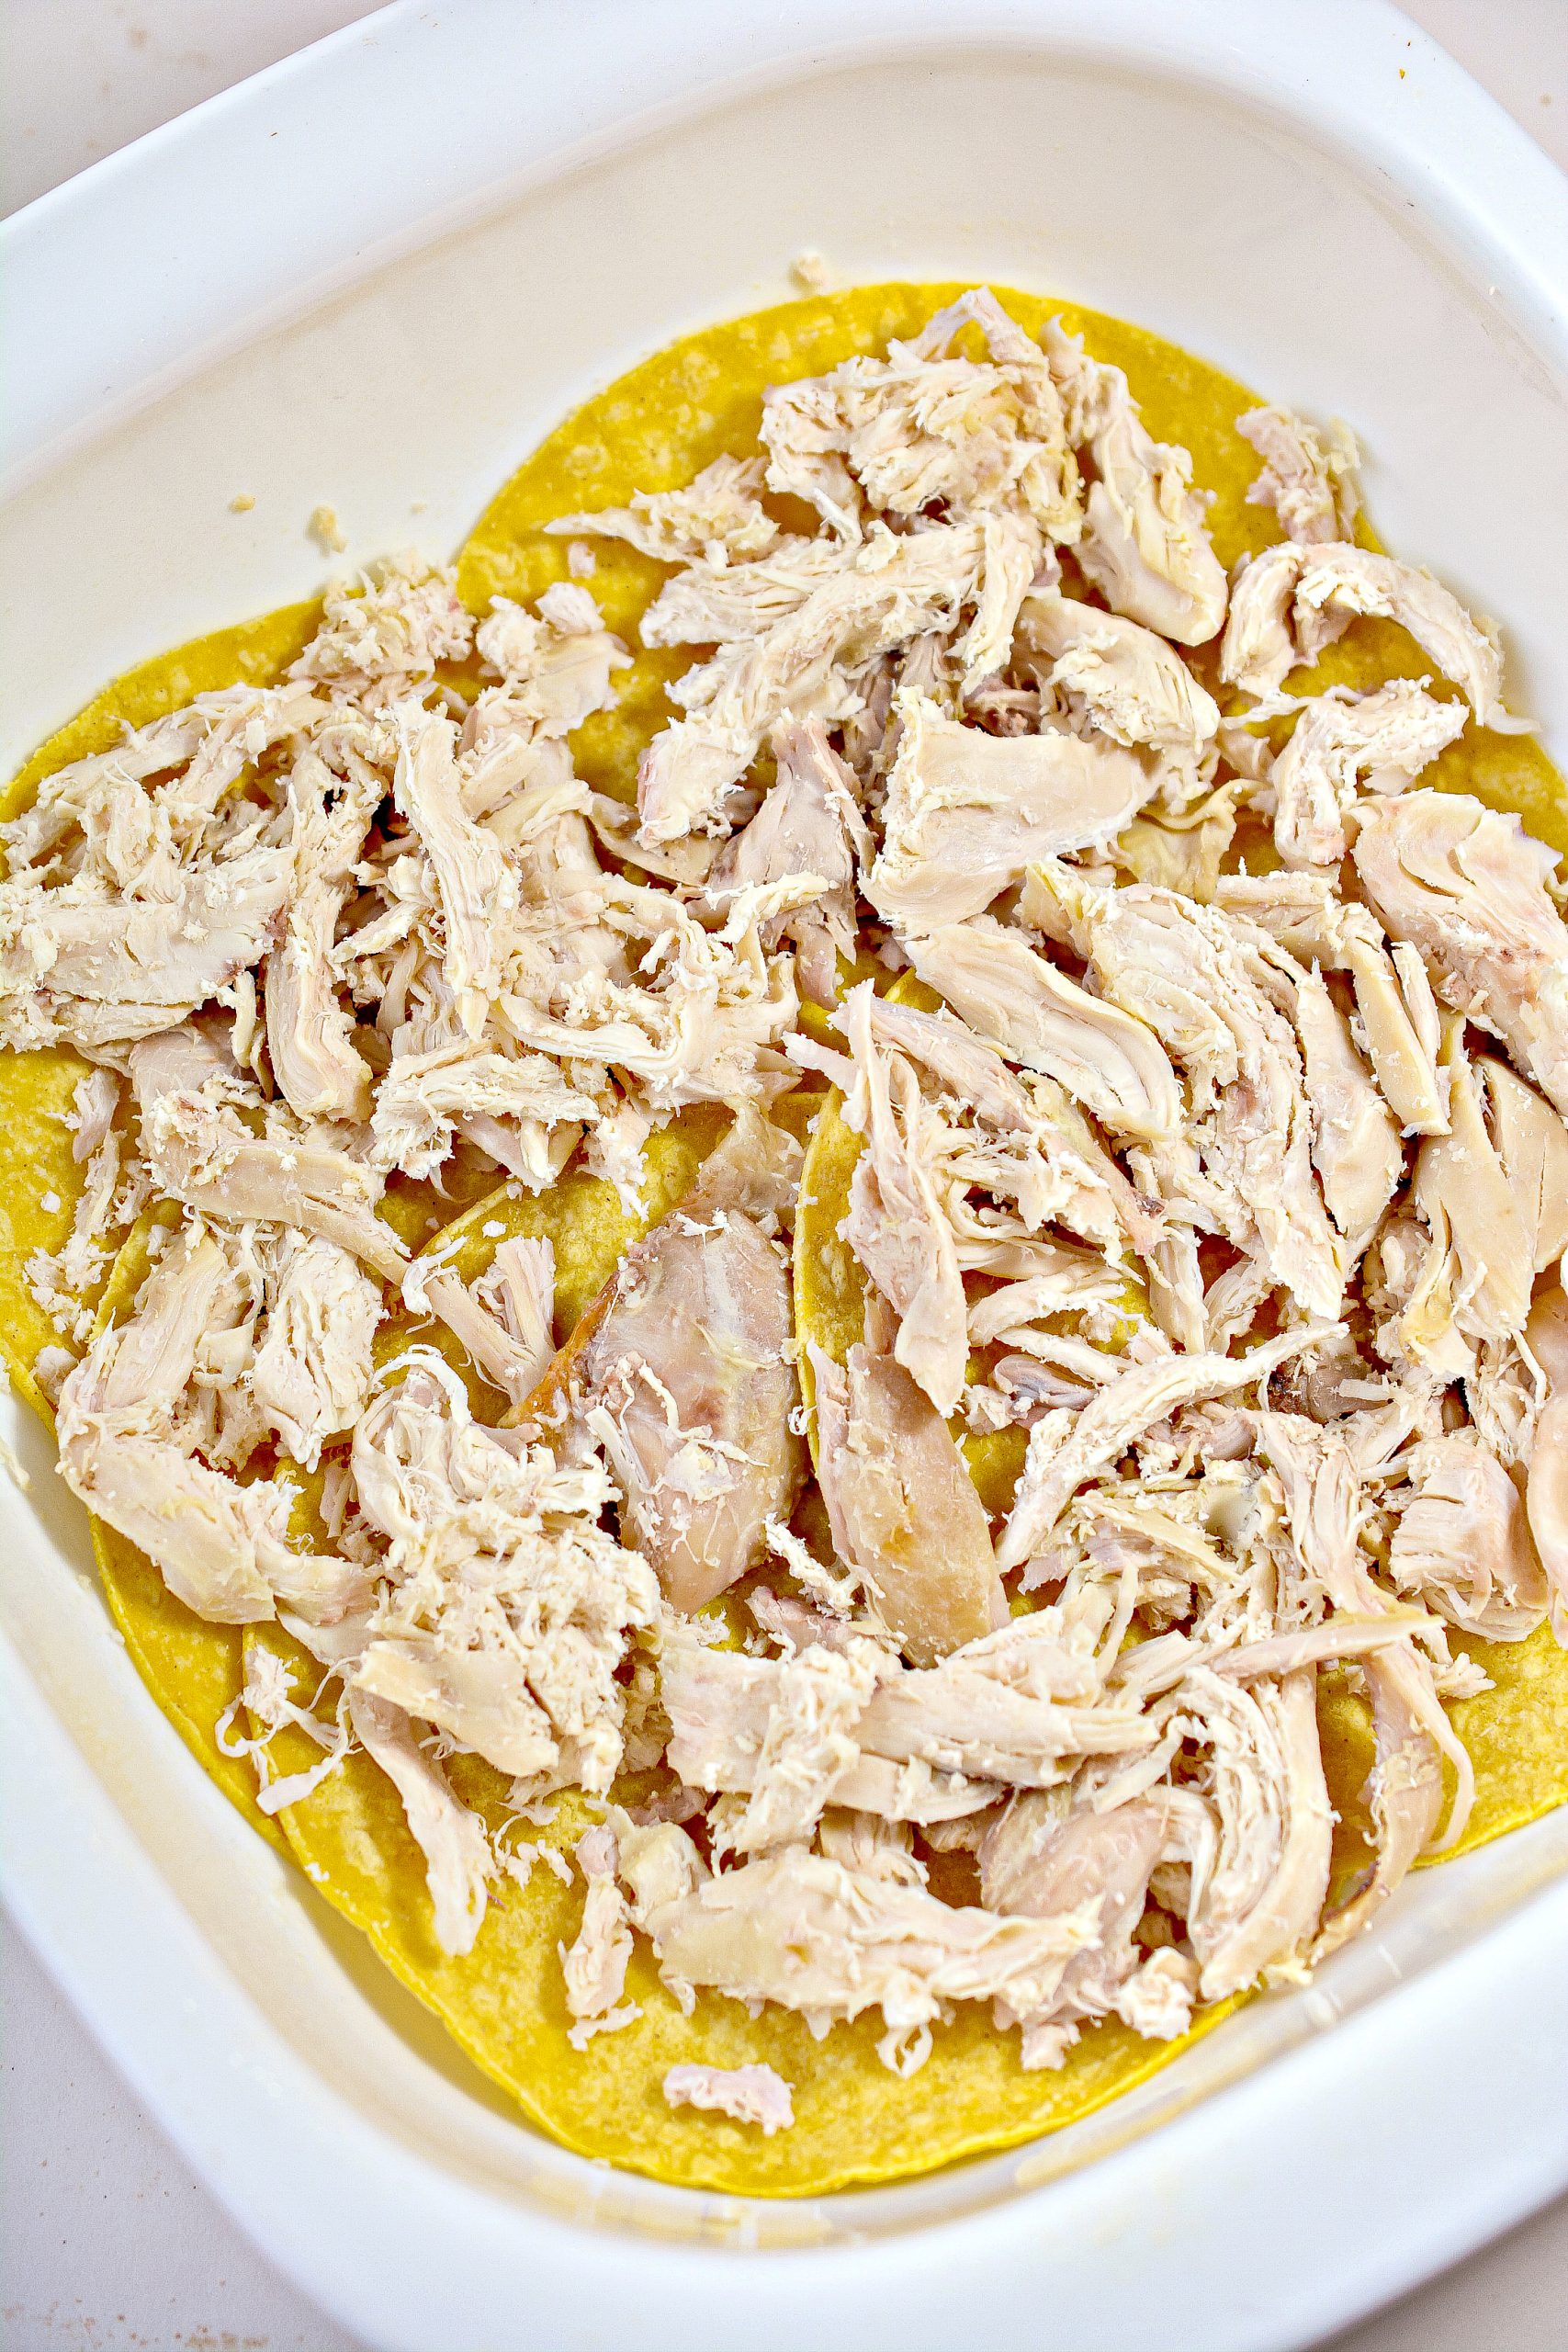 Place a layer of half of the shredded chicken on top of the tortillas in the baking dish.